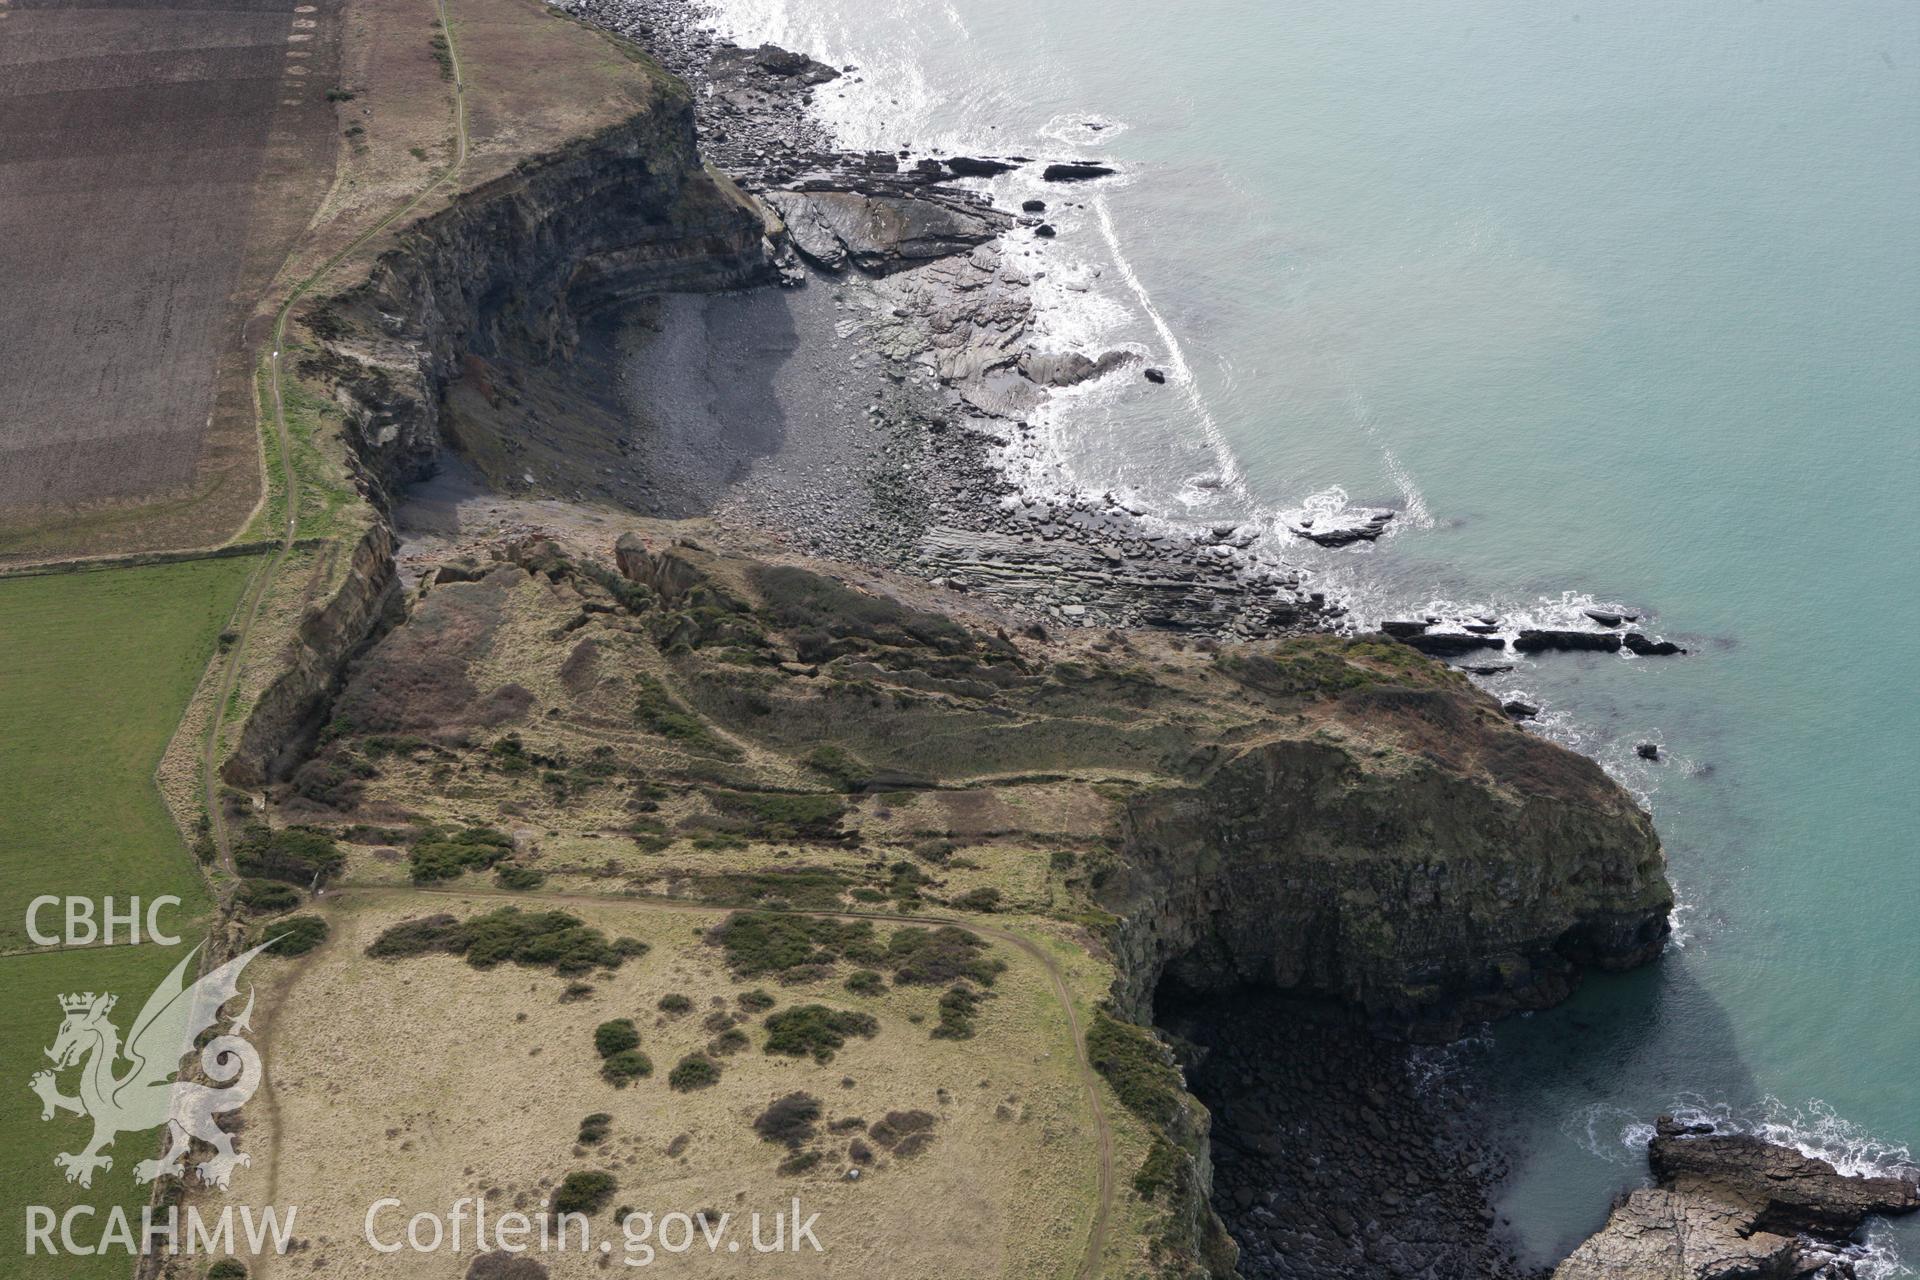 RCAHMW colour oblique aerial photograph of Black Point Rath. Taken on 02 March 2010 by Toby Driver